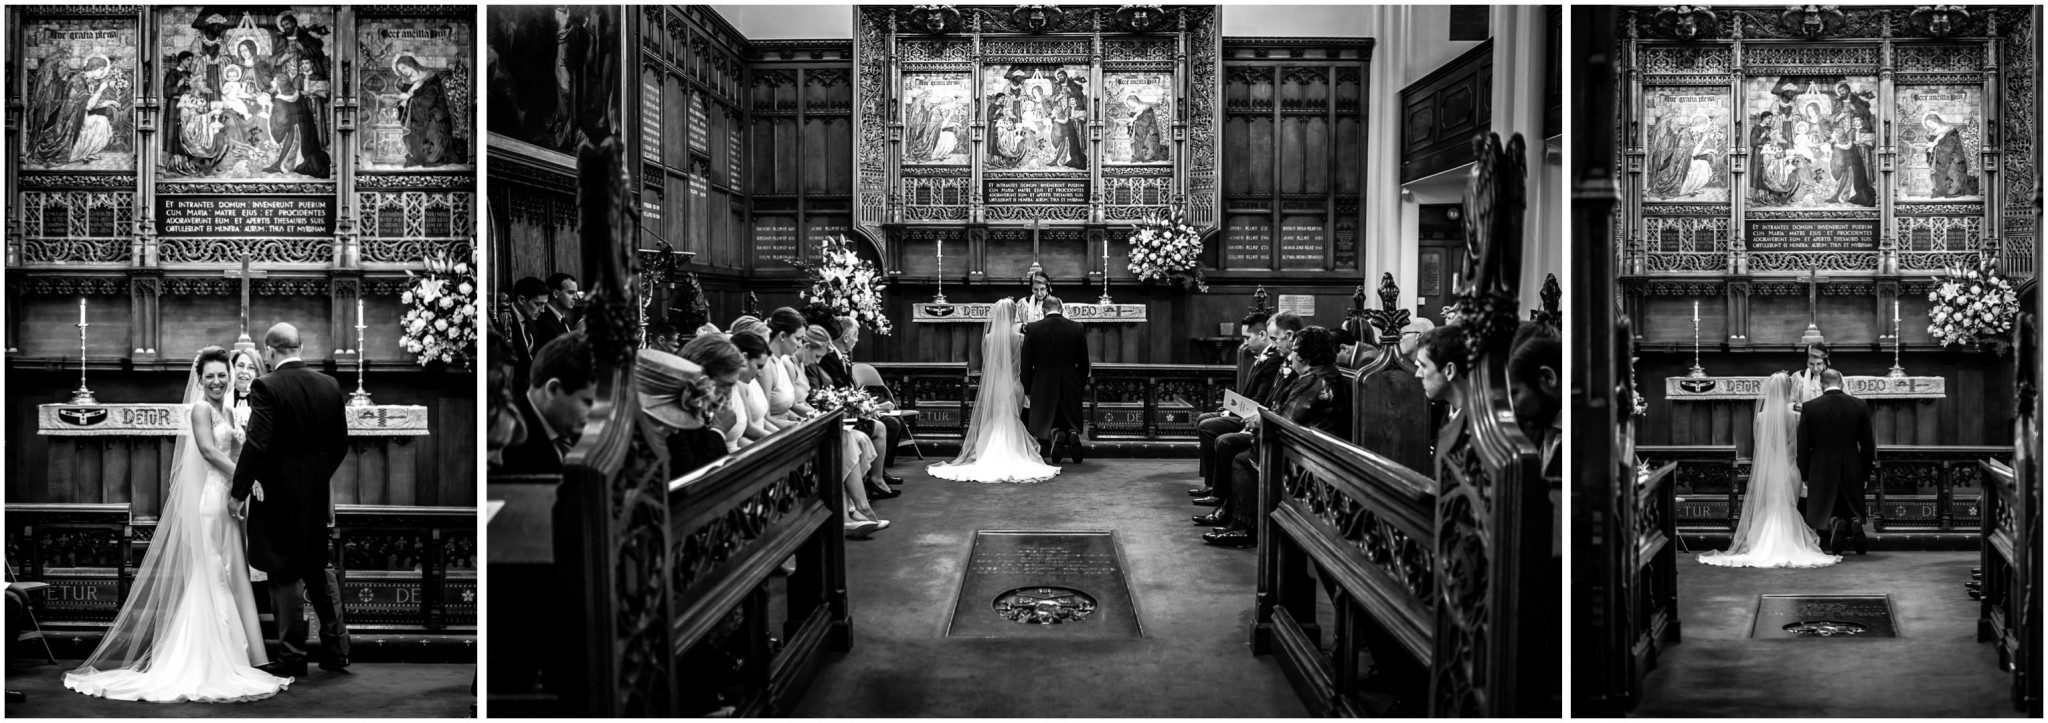 dulwich-picture-gallery-wedding-photography-031